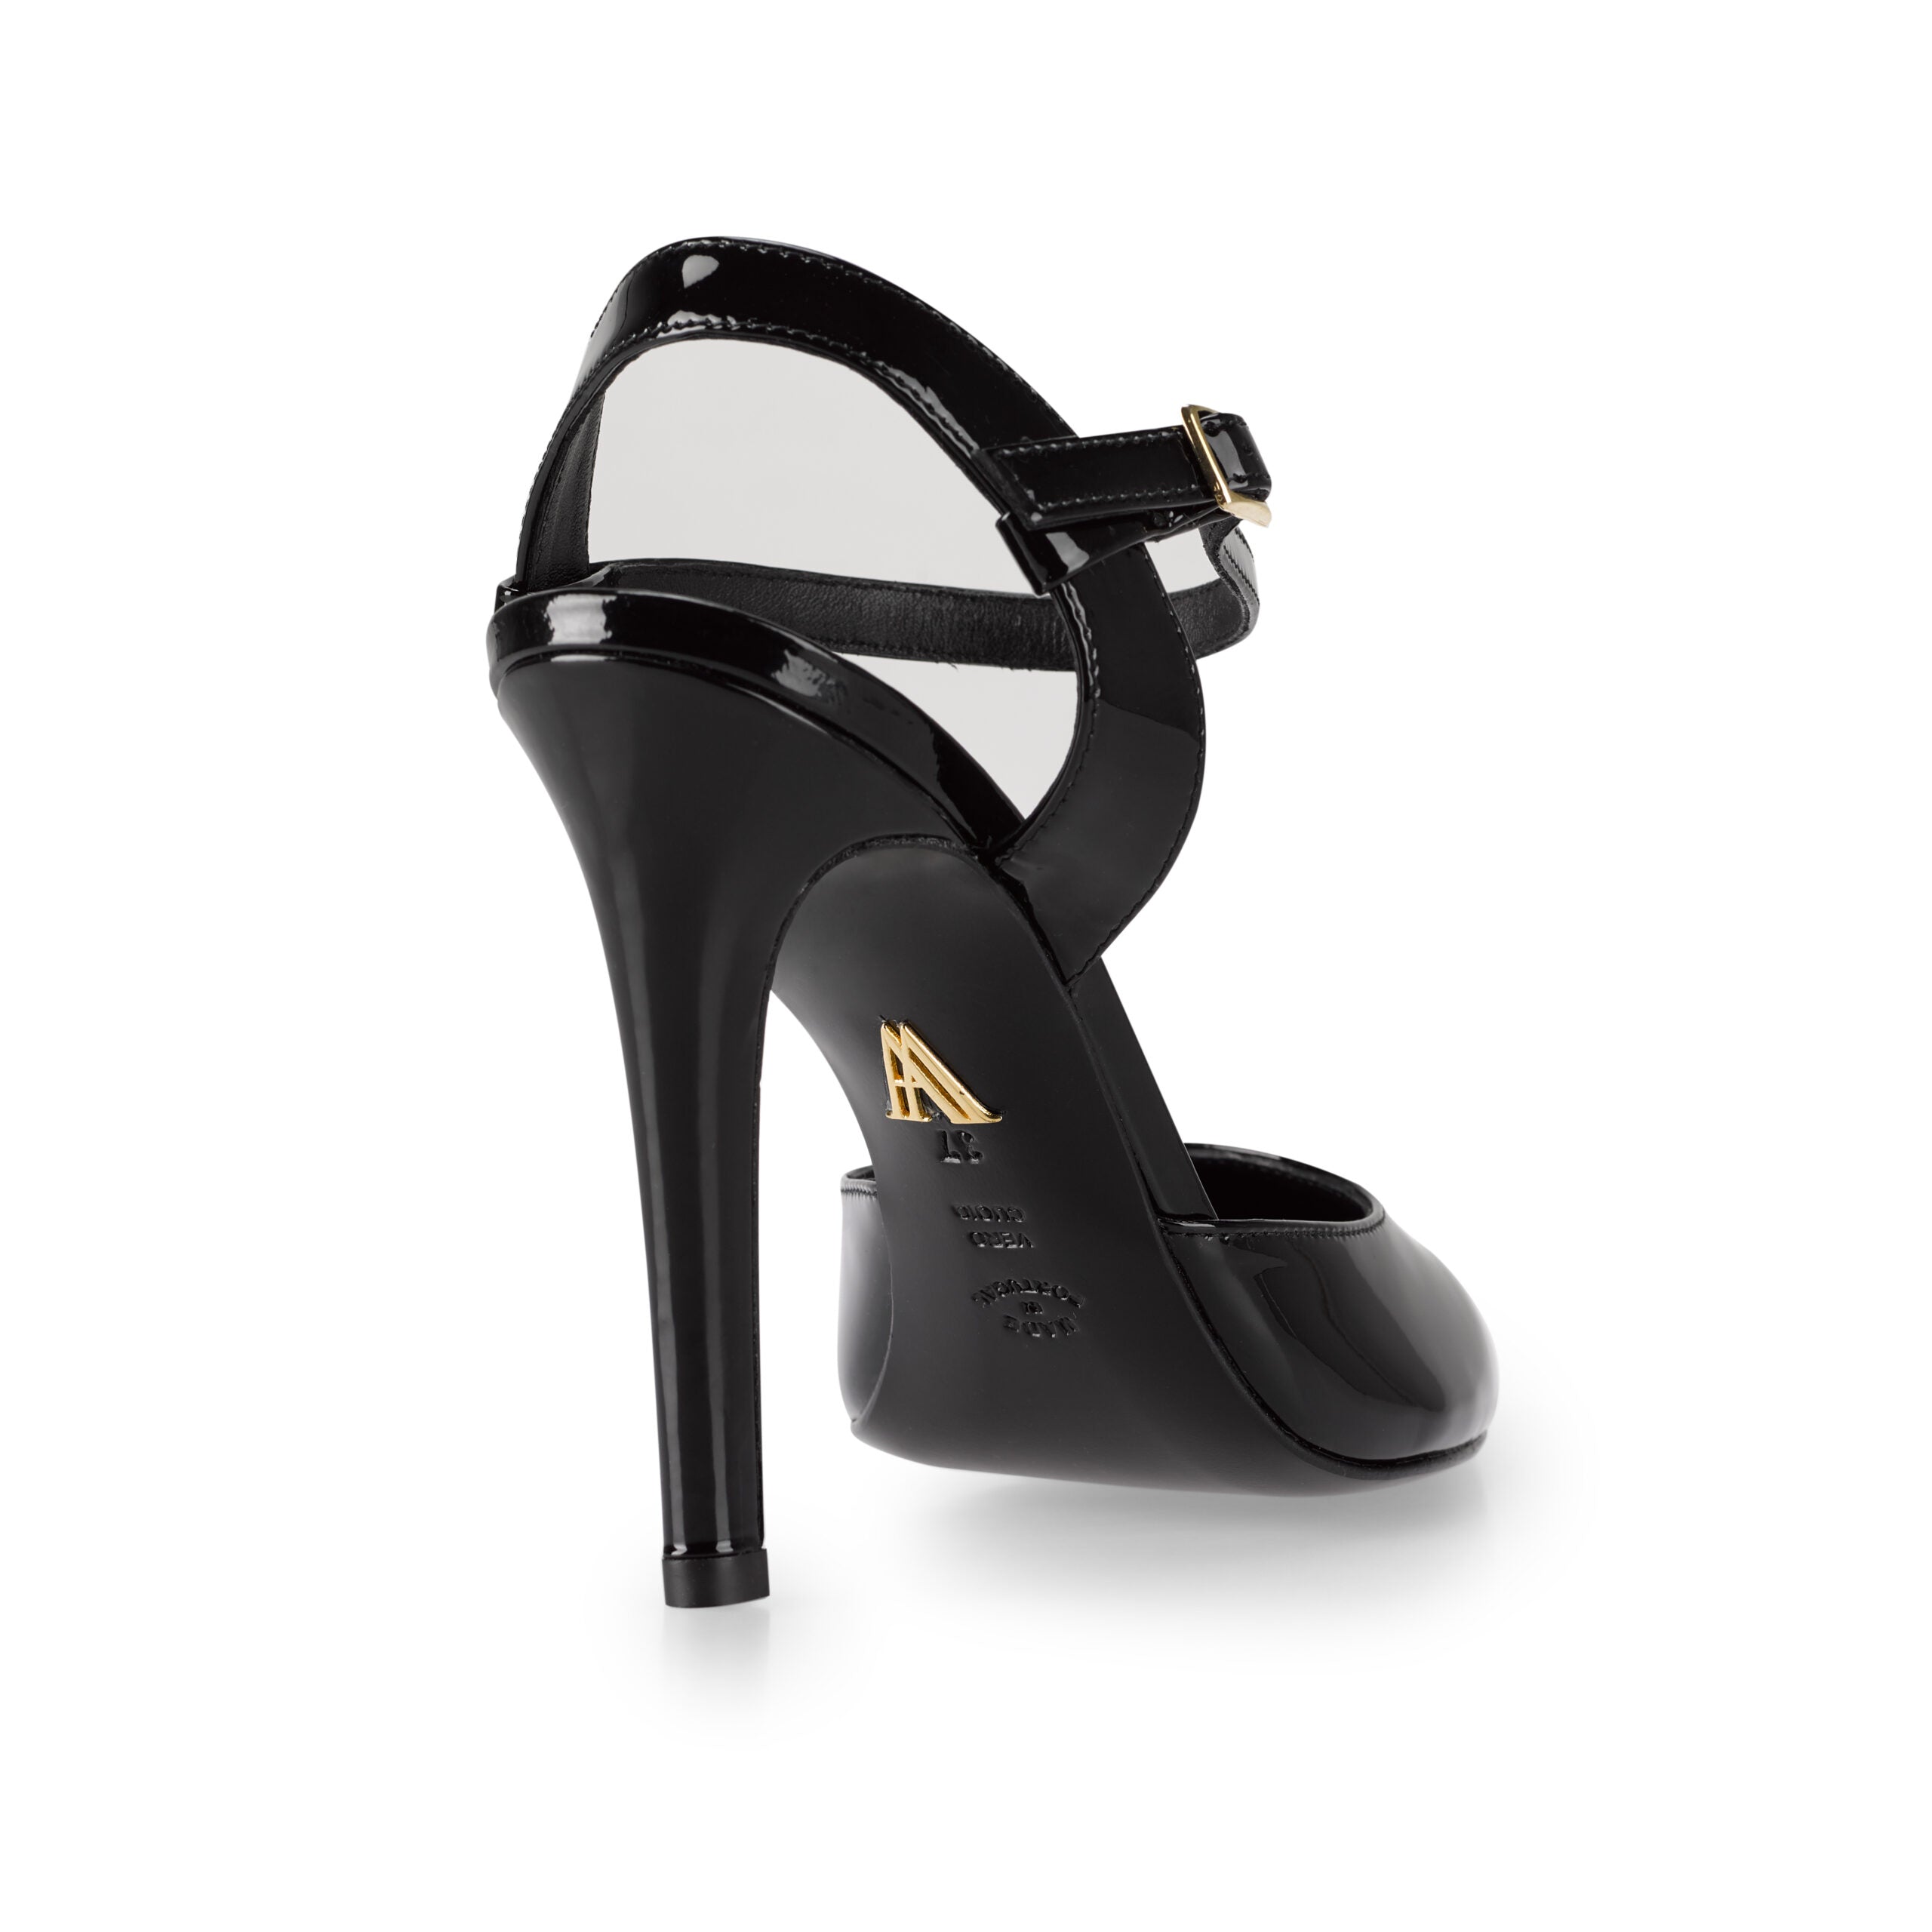 Add a romantic sensuality to any ensemble with our Marlyn pumps.